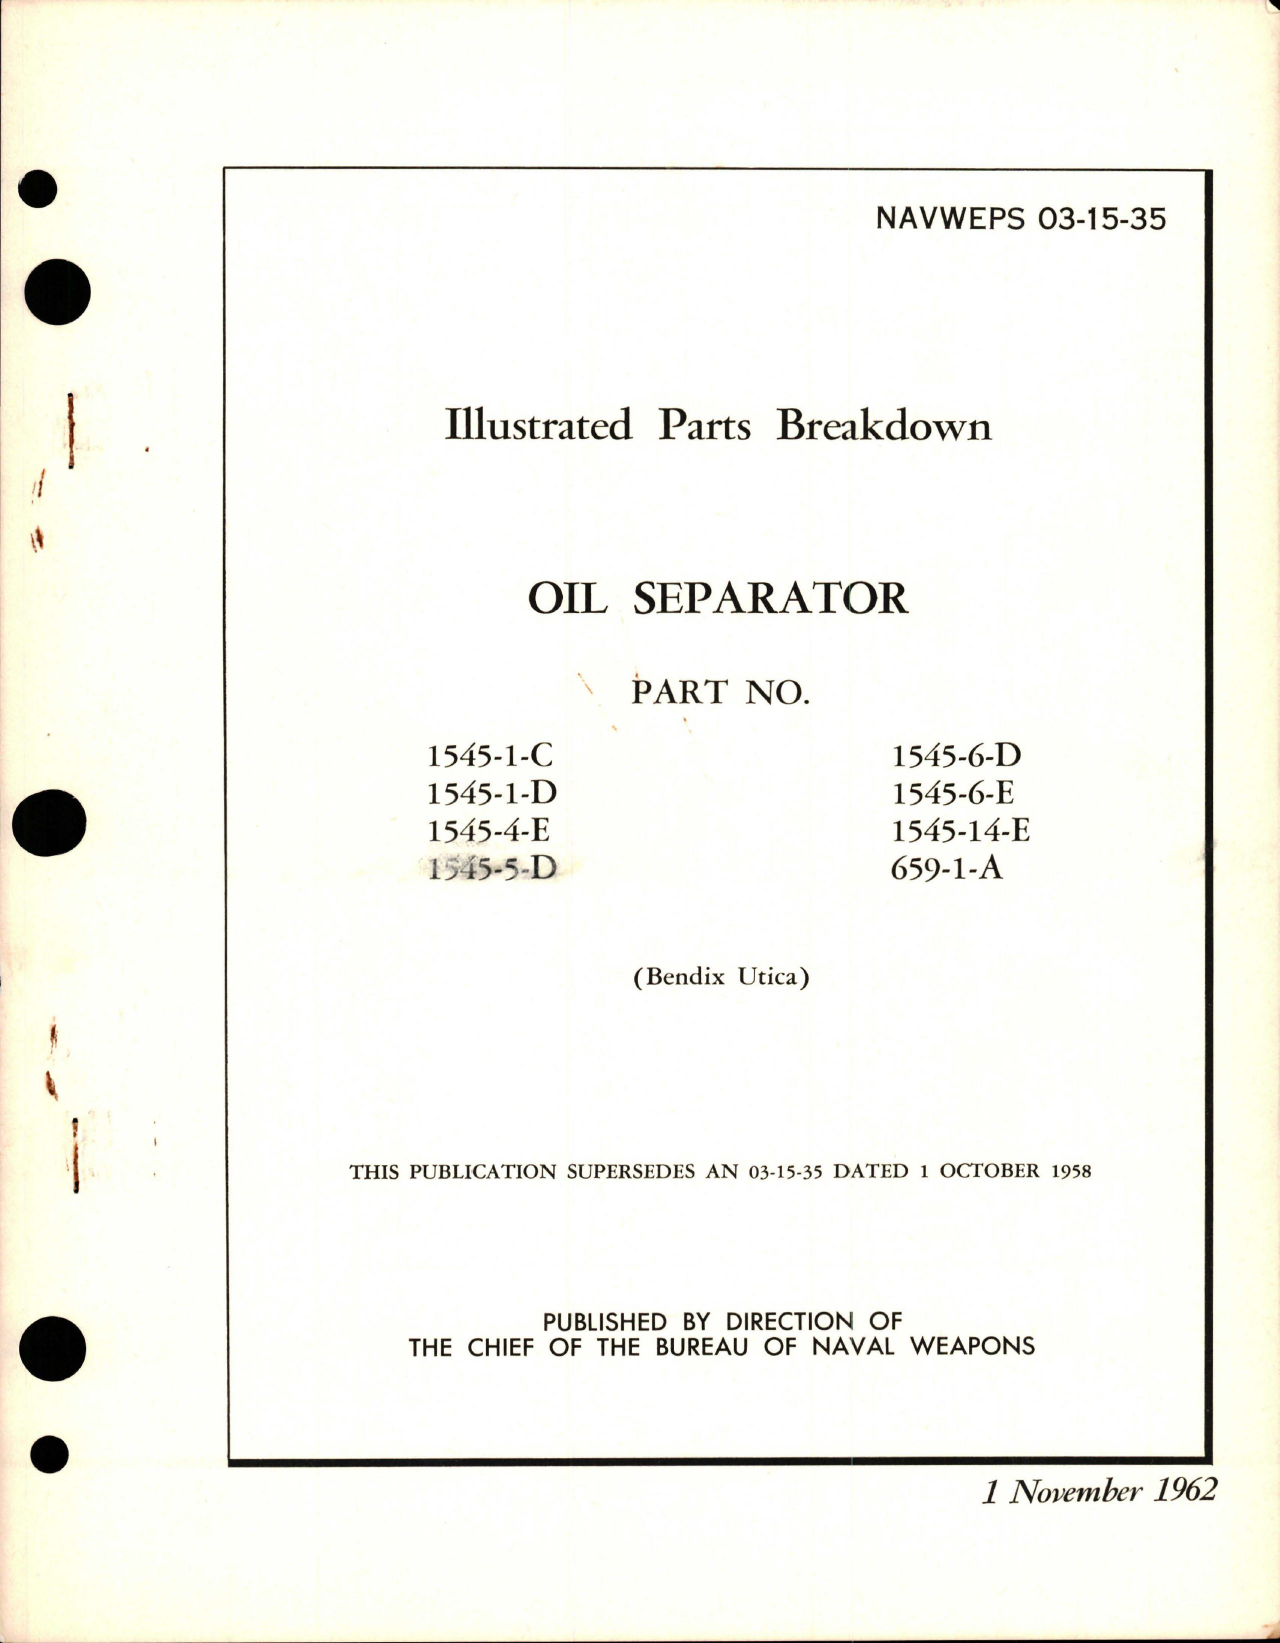 Sample page 1 from AirCorps Library document: Illustrated Parts Breakdown for Oil Separator